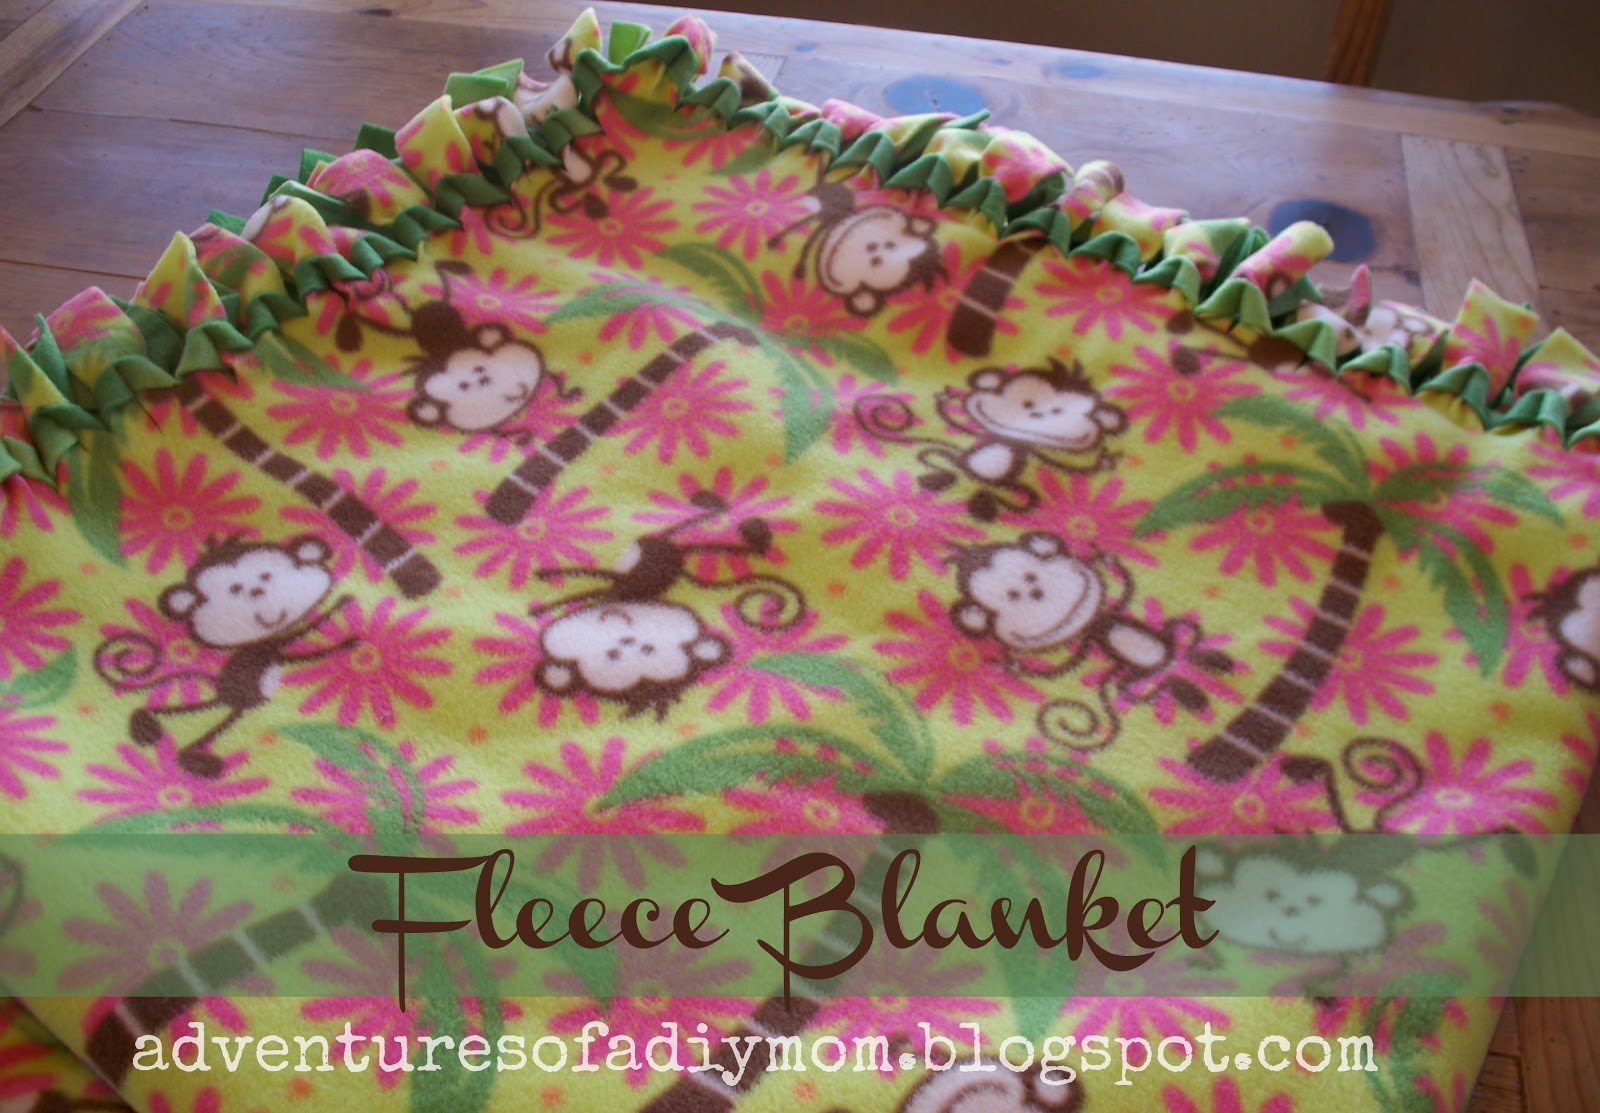 How To Make A No Sew Fleece Blanket Without Knots Adventures Of A DIY Mom